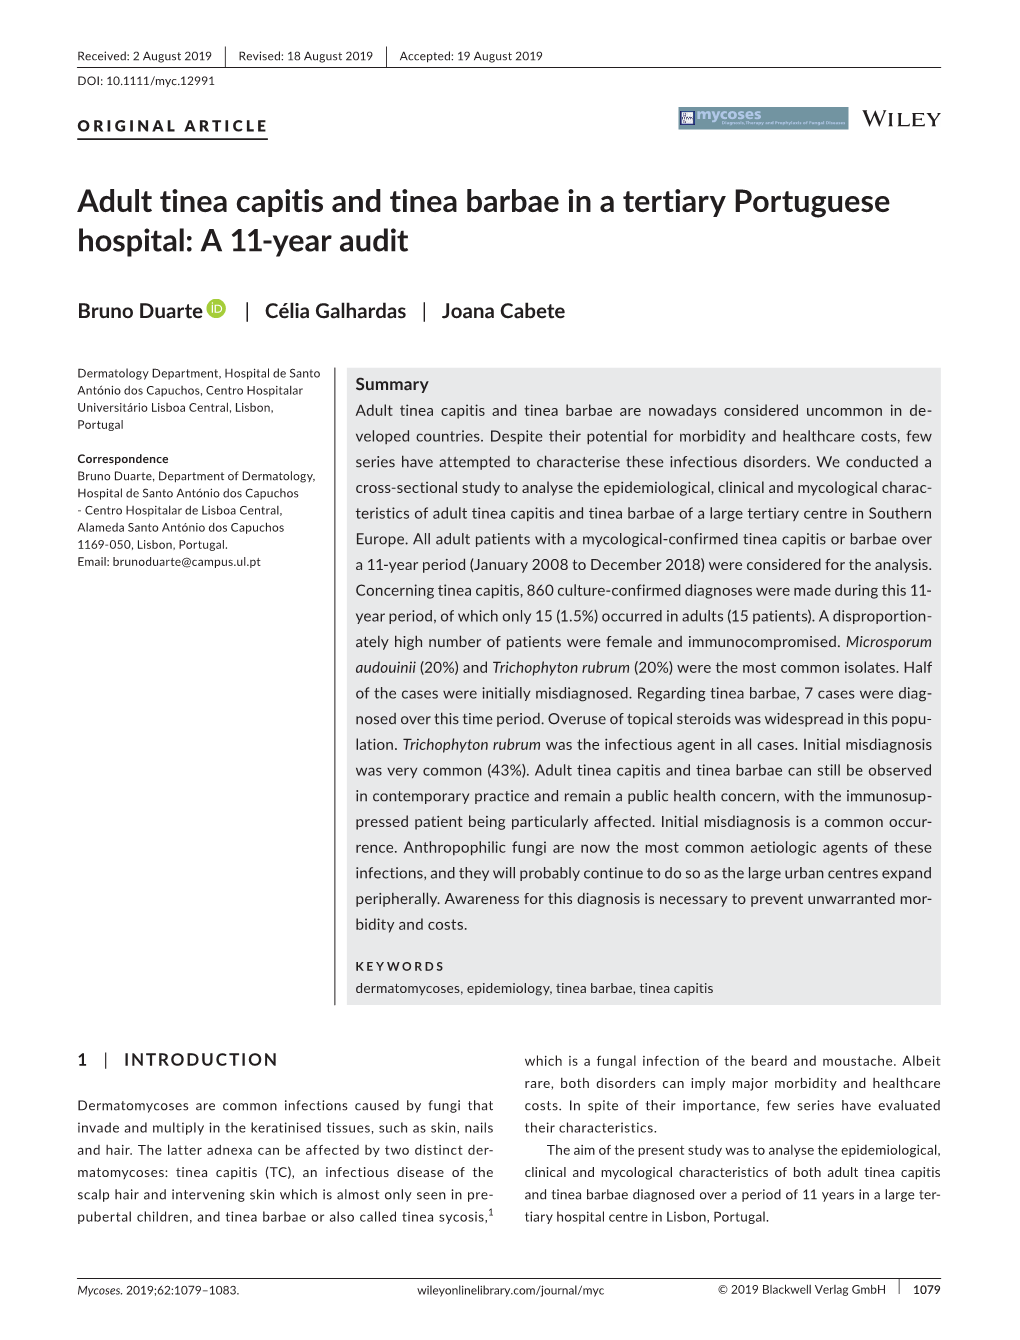 Adult Tinea Capitis and Tinea Barbae in a Tertiary Portuguese Hospital: a 11‐Year Audit